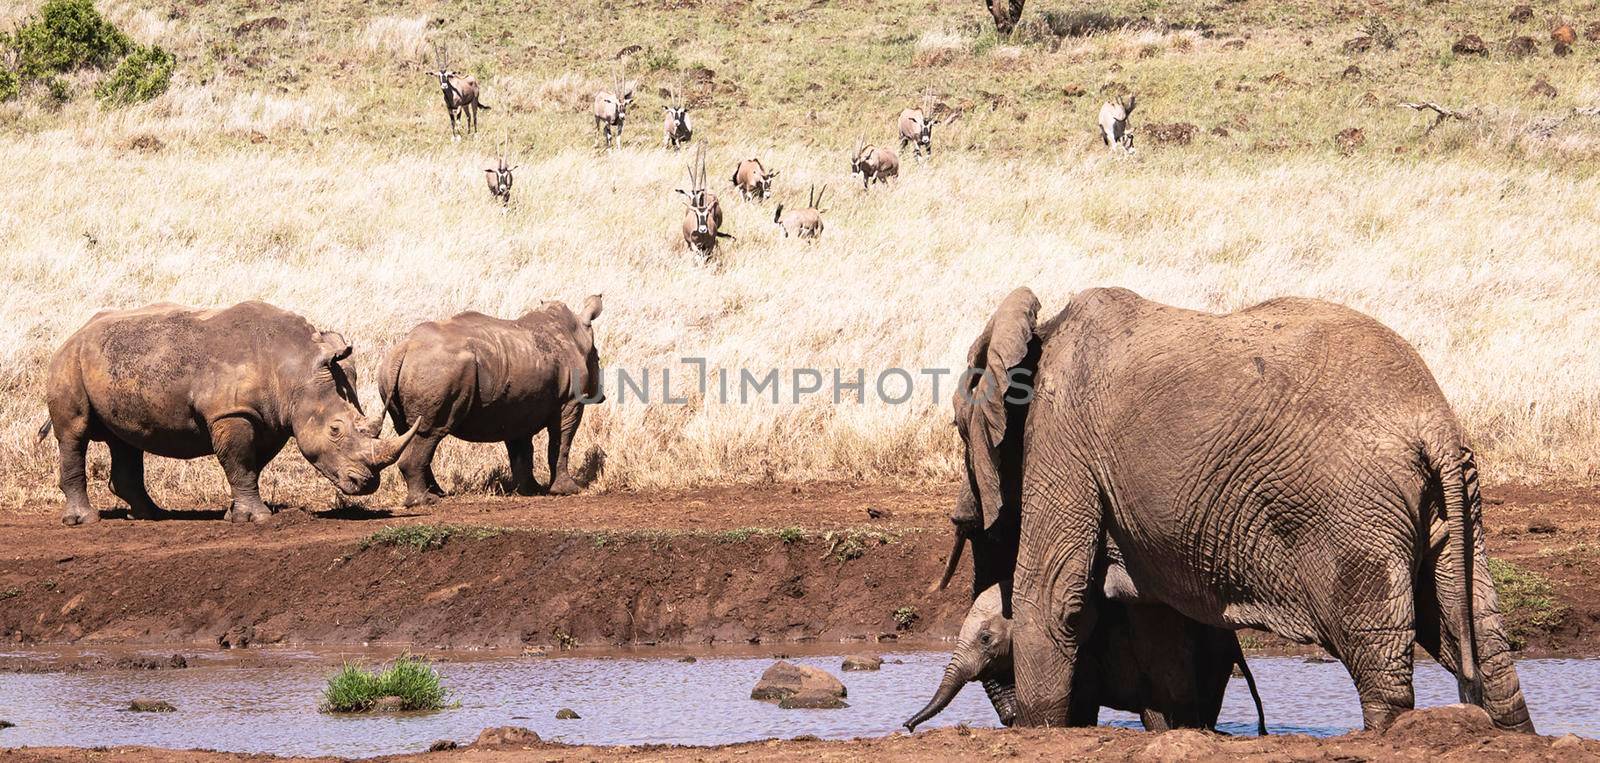 Laikipia ,Kenya wildlife  Pictures by TravelSync27